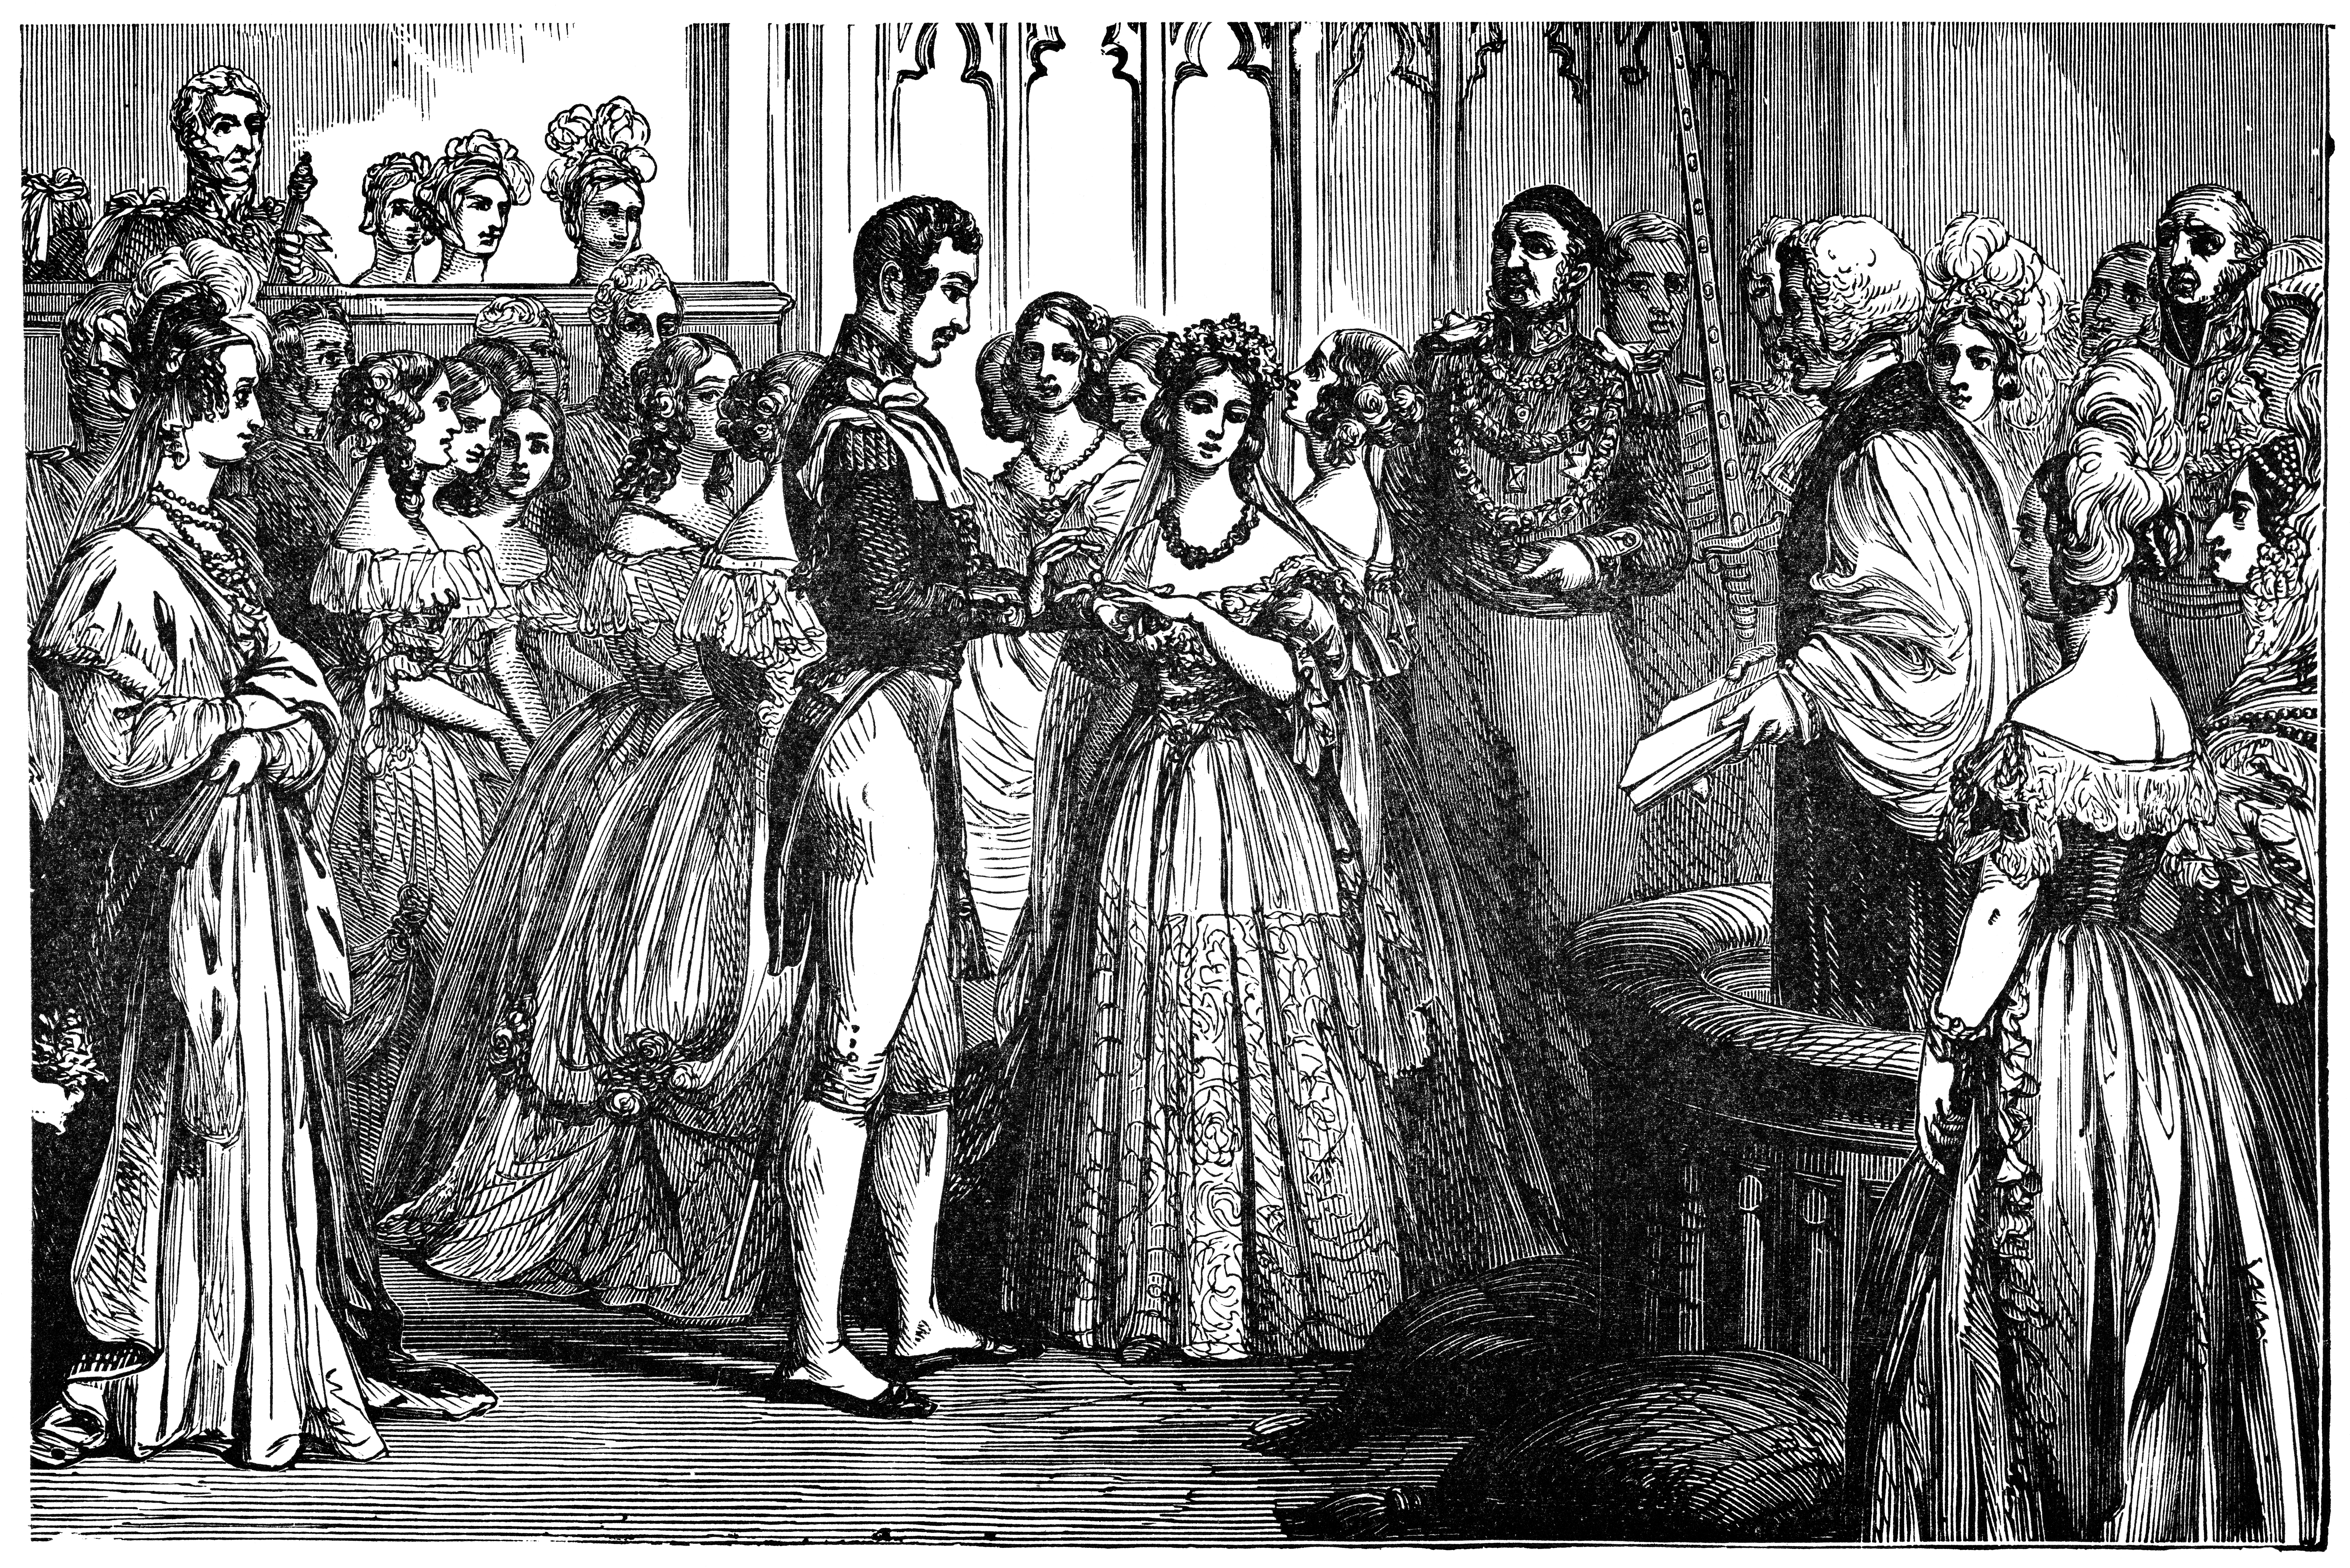 The Wedding of Victoria I, Queen of England and Prince Albert of Saxe-Coburg and Gotha in London, England.